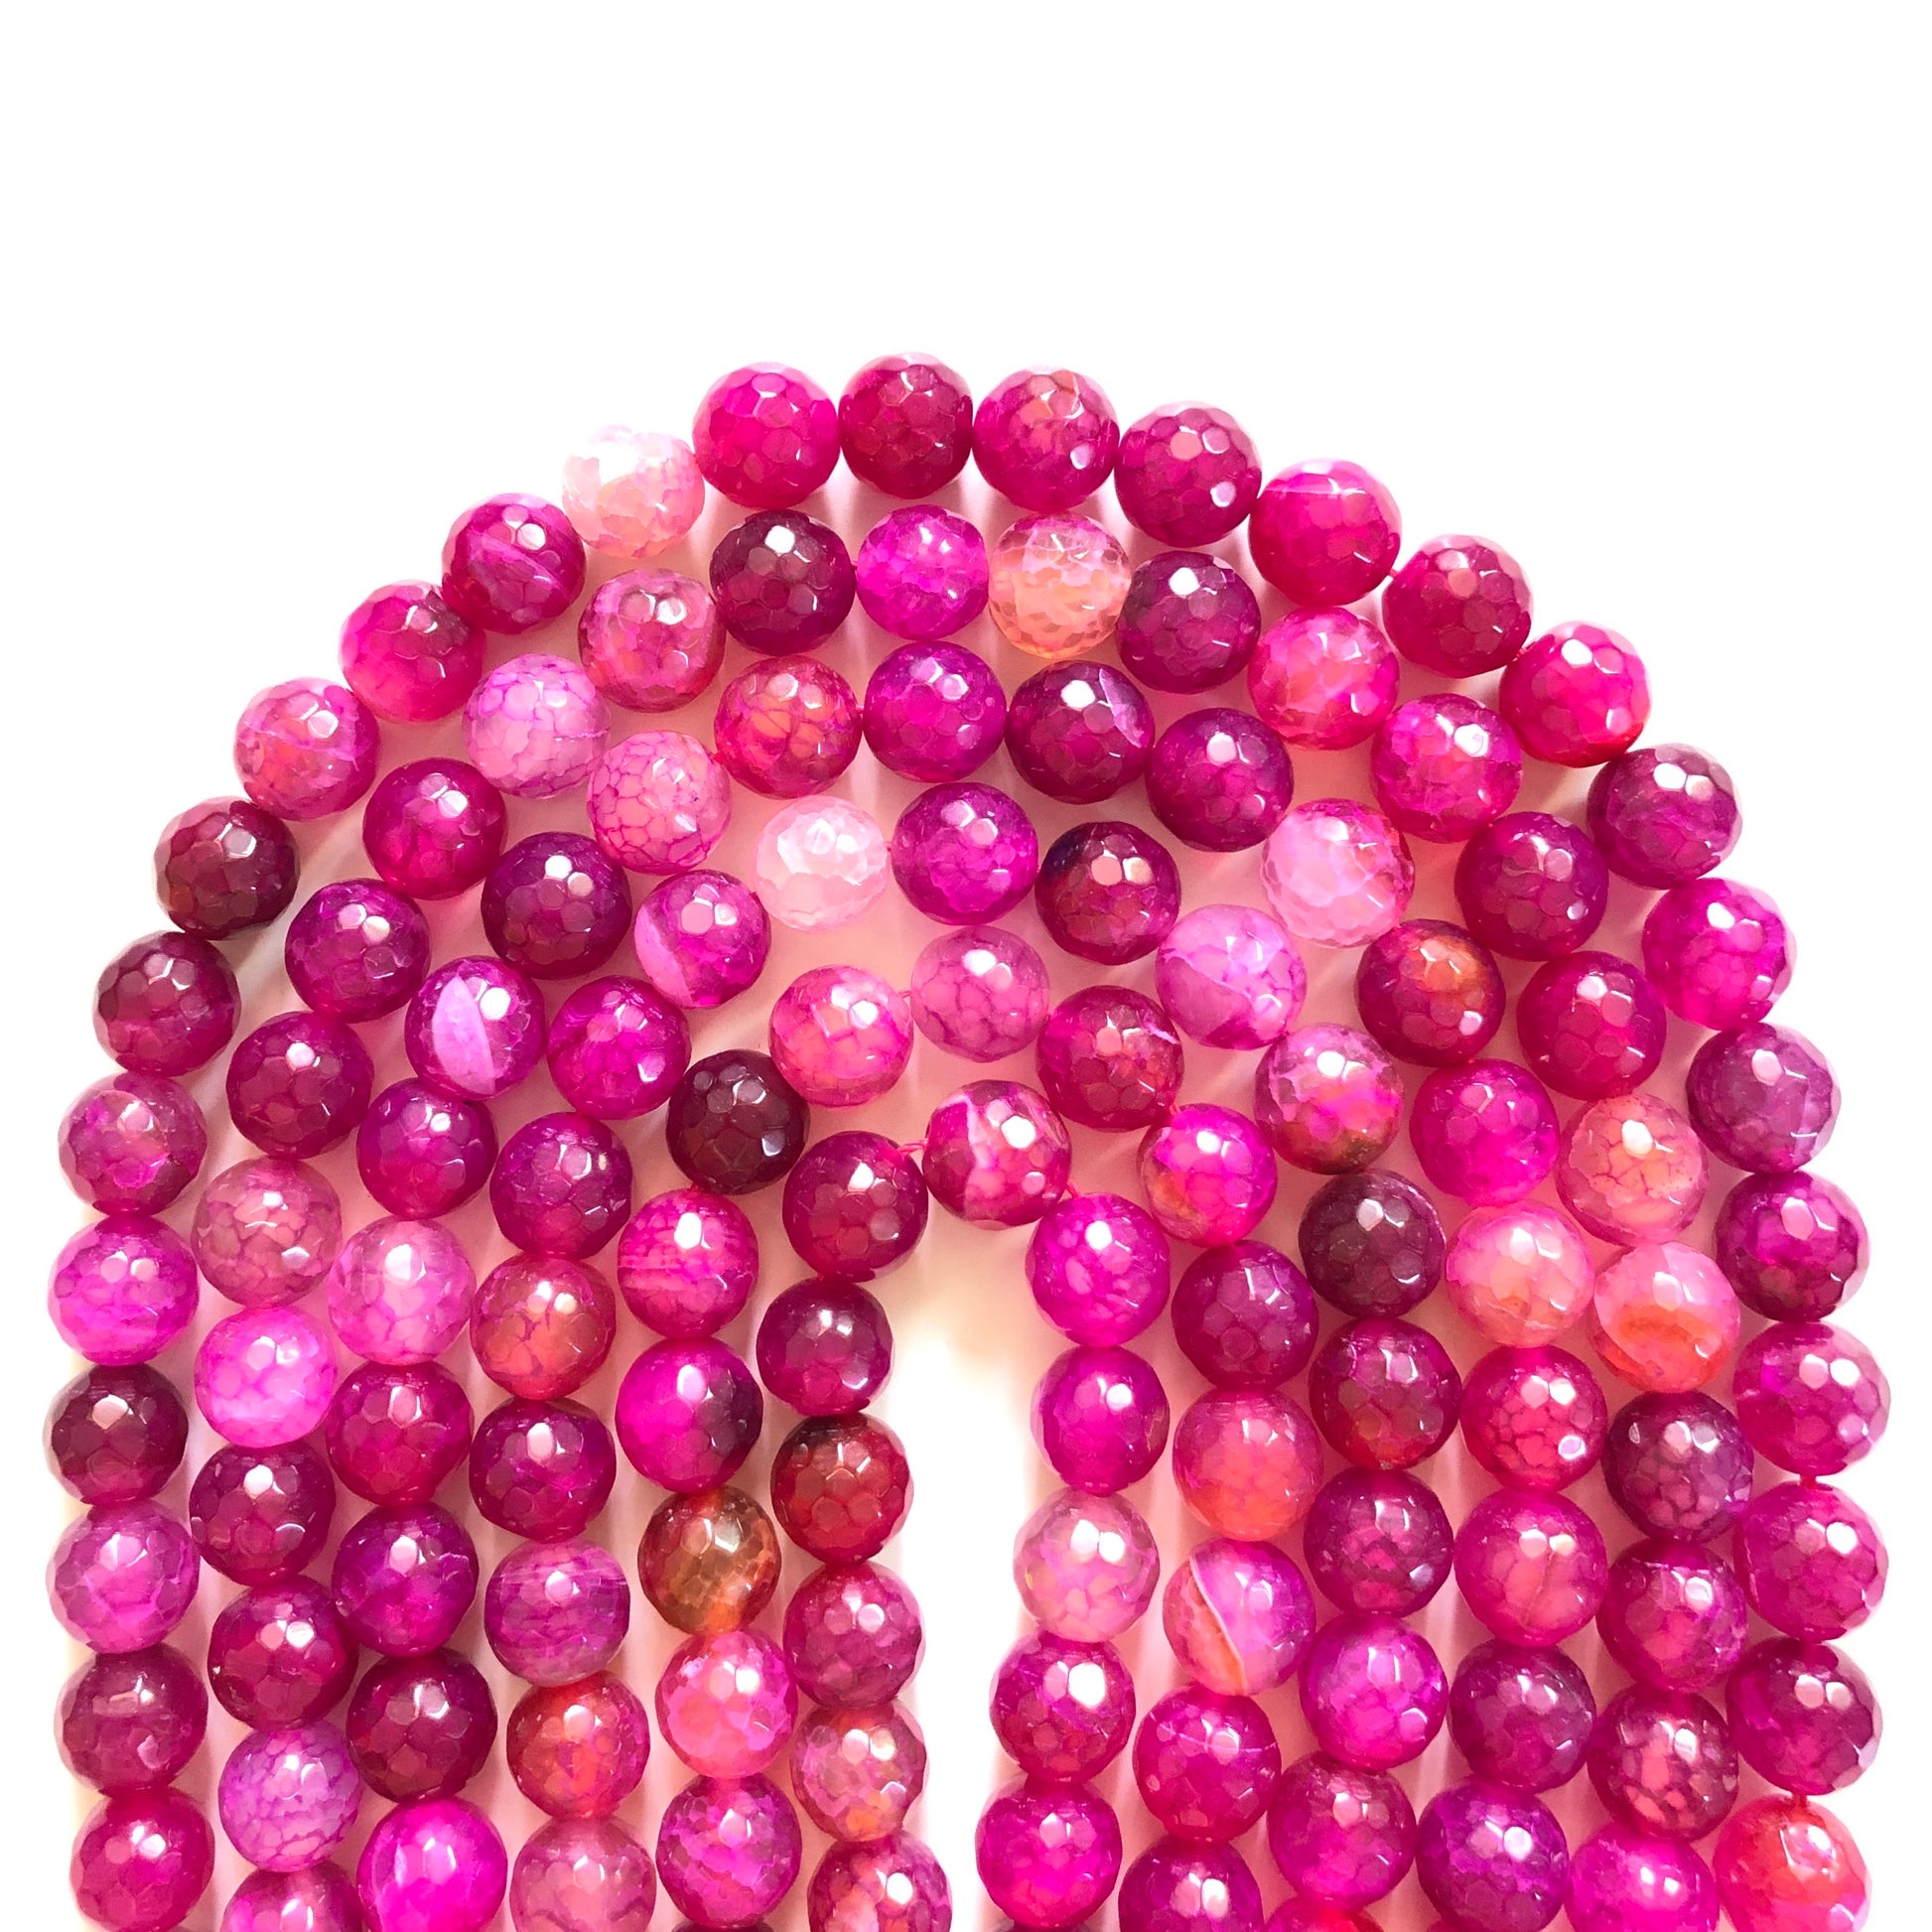 2 Strands/lot 12mm Hot Pink Fuchsia Faceted Dragon Agate Stone Beads Stone Beads 12mm Stone Beads Faceted Agate Beads Charms Beads Beyond